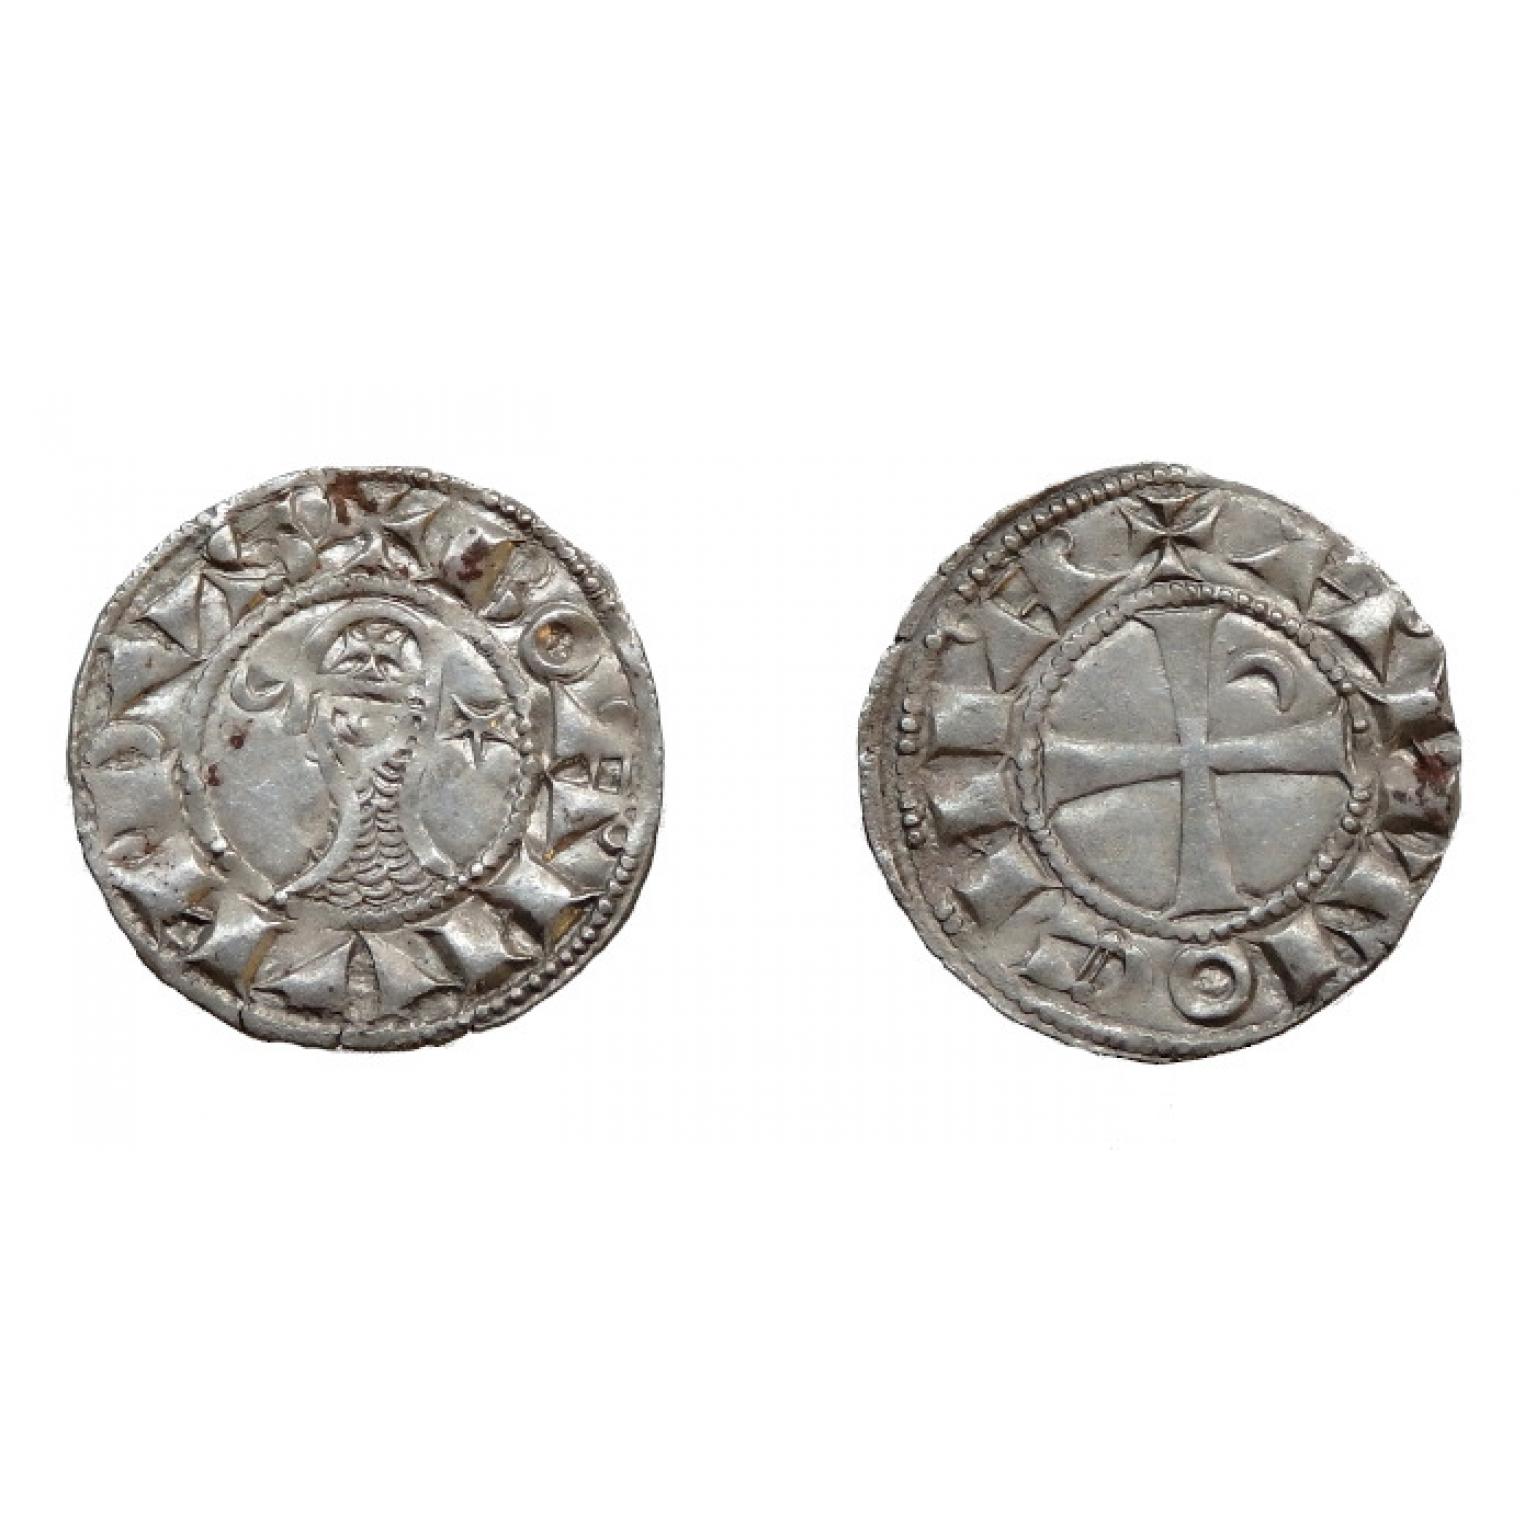 Medieval Coins Hammered Coins From 1066 1377 Den Of Antiquity